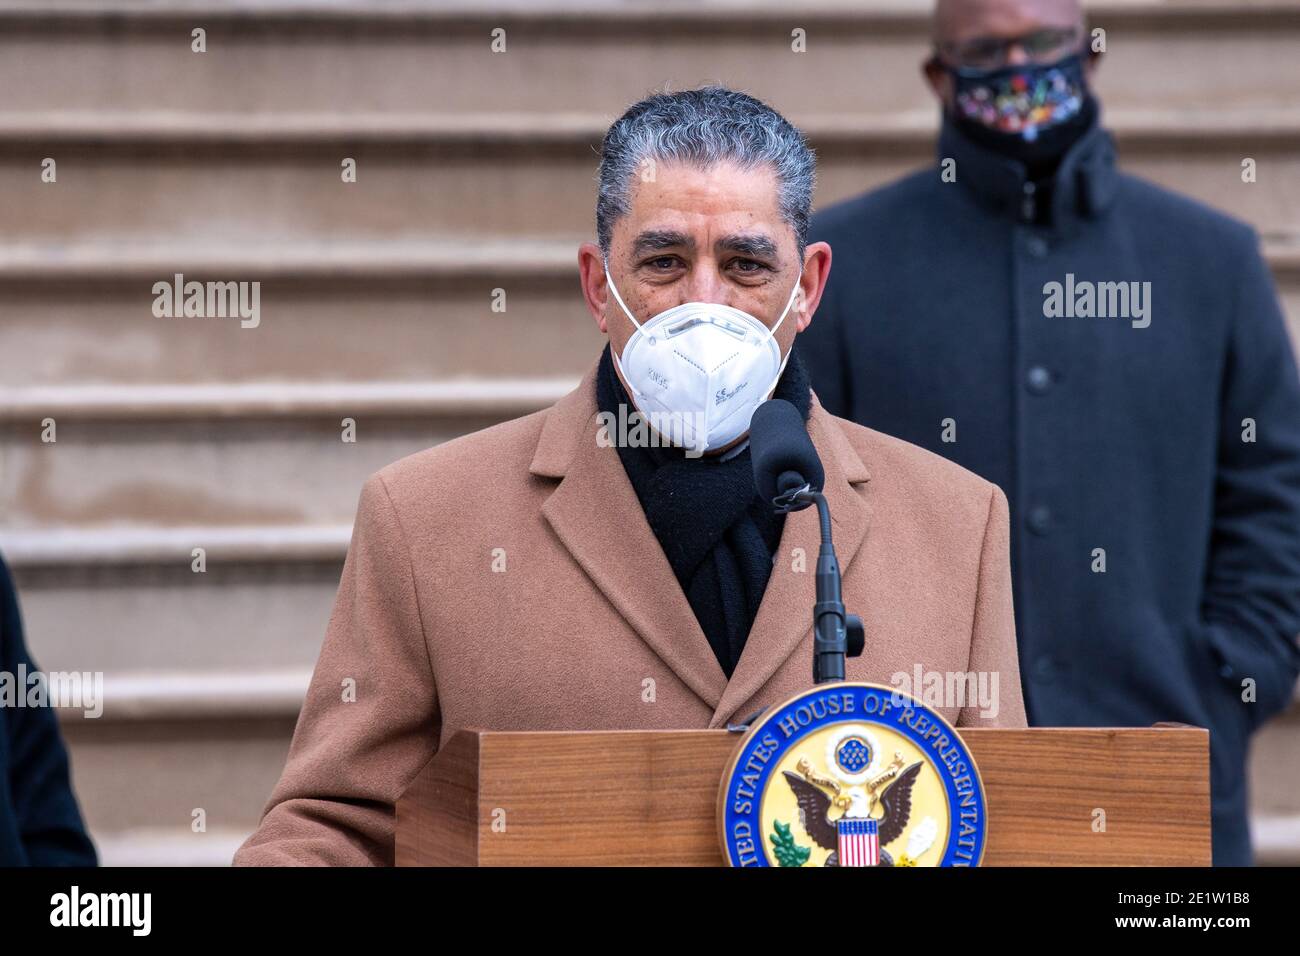 New York, United States. 09th Jan, 2021. NEW YORK, NY - JANUARY 09: Congressman Adriano Espaillat (D-NY) speaks during a press conference at City Hall on January 9, 2021 in New York City. Mayor de Blasio joined the Congressional members and called for swift impeachment of President Donald Trump following the violent siege of the U.S. Capitol by Trump supporters that left five dead. Credit: Ron Adar/Alamy Live News Stock Photo